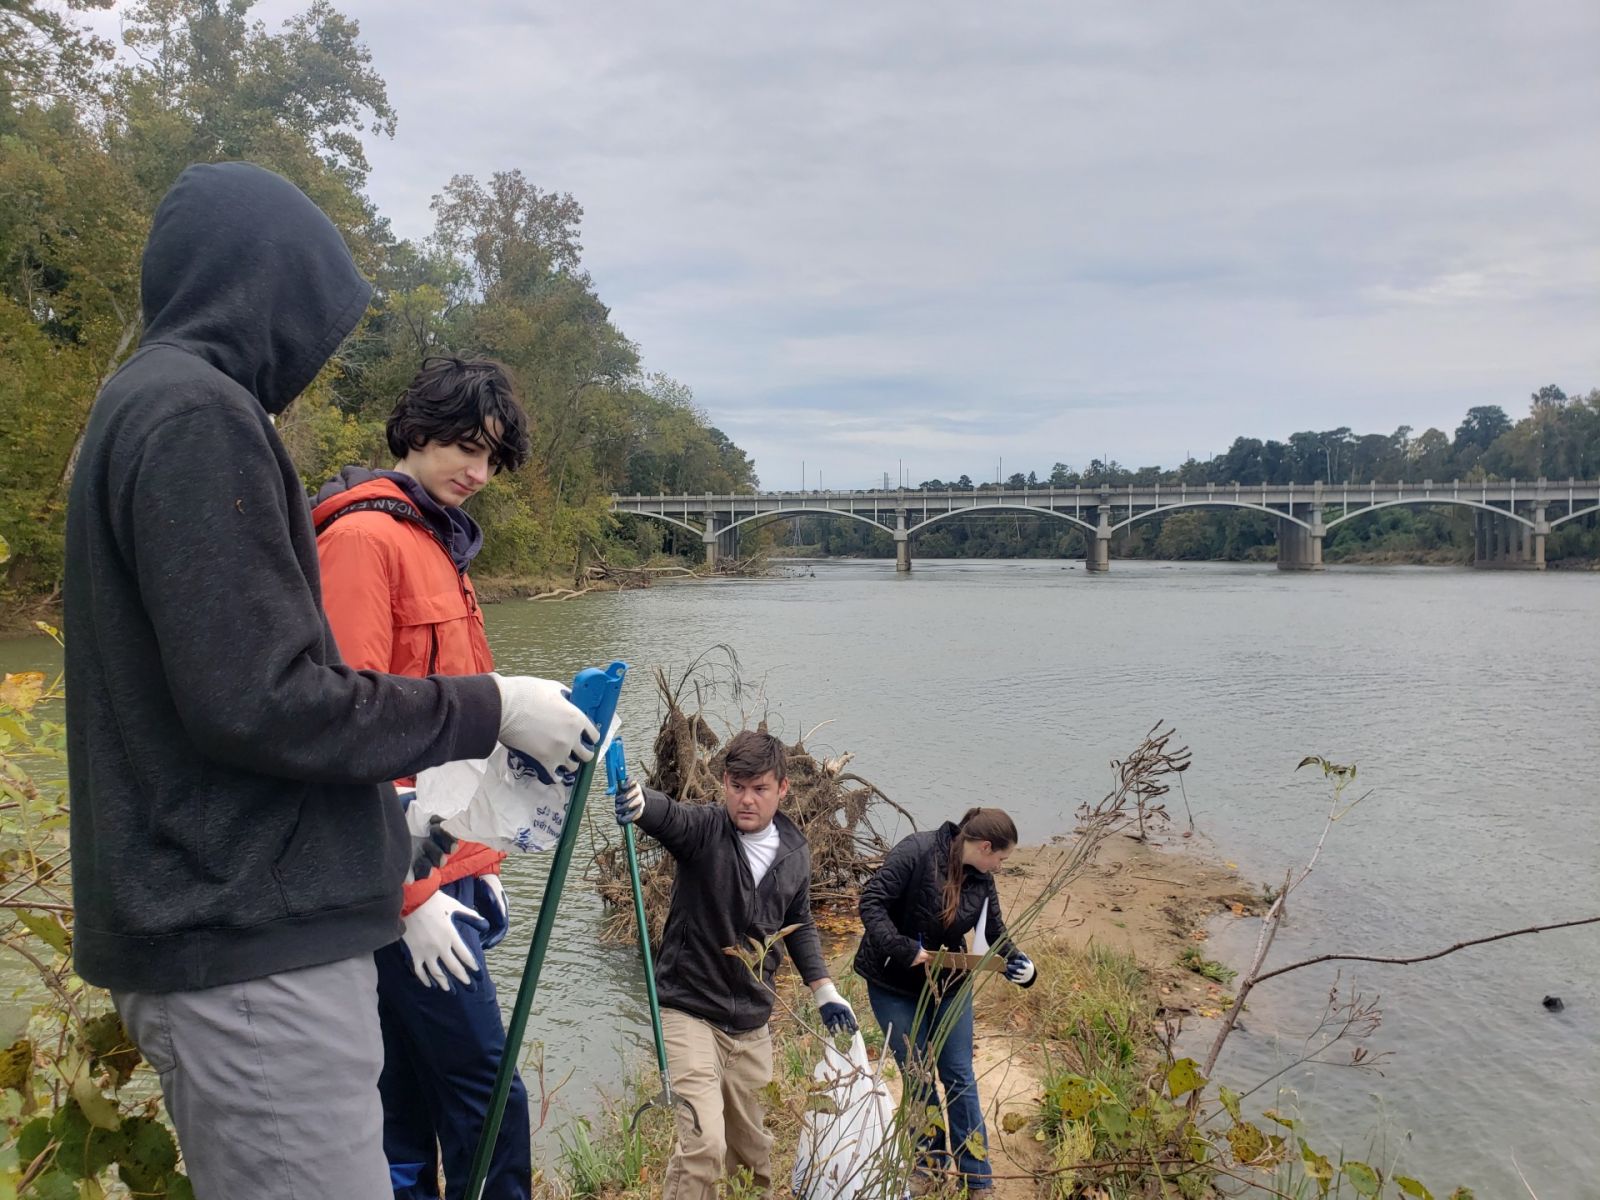 Students in Spring Valley High School's Adopt-a-Stream Club recently completed a litter cleanup in cooperation with the Congaree Riverkeeper. The students will next plant tress on campus. (Photo/Provided)